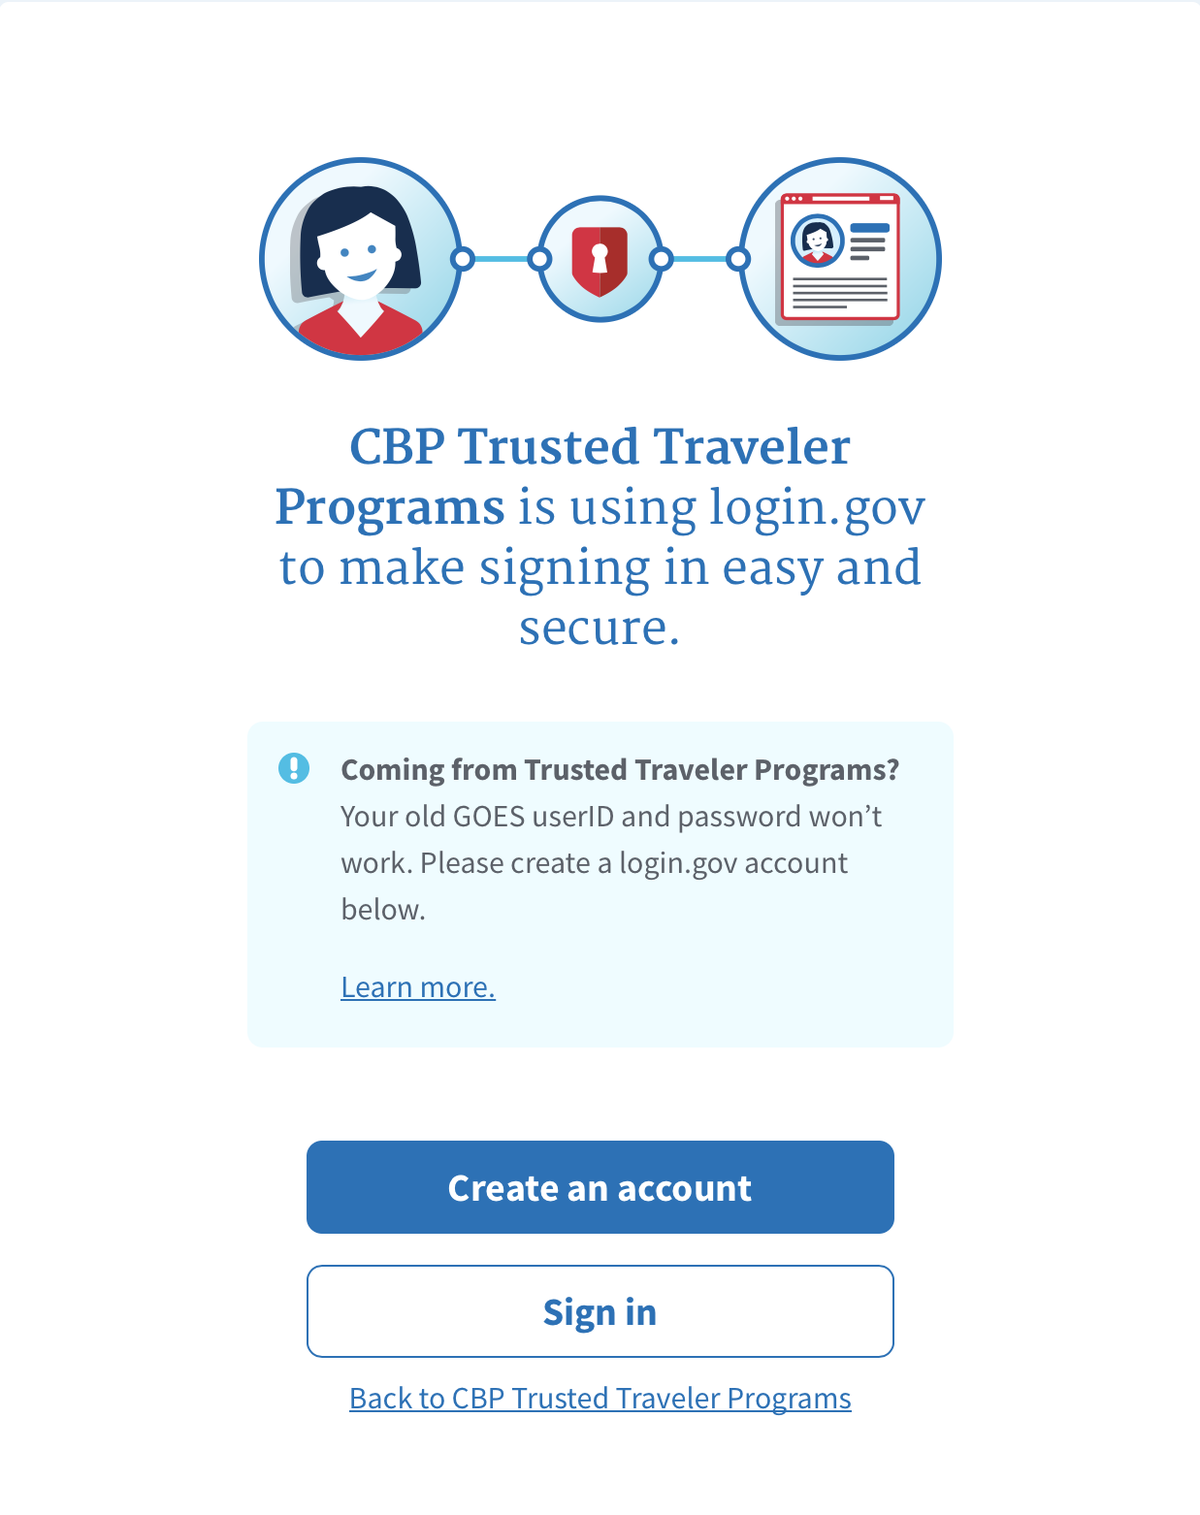 Create your CBP trusted traveler account